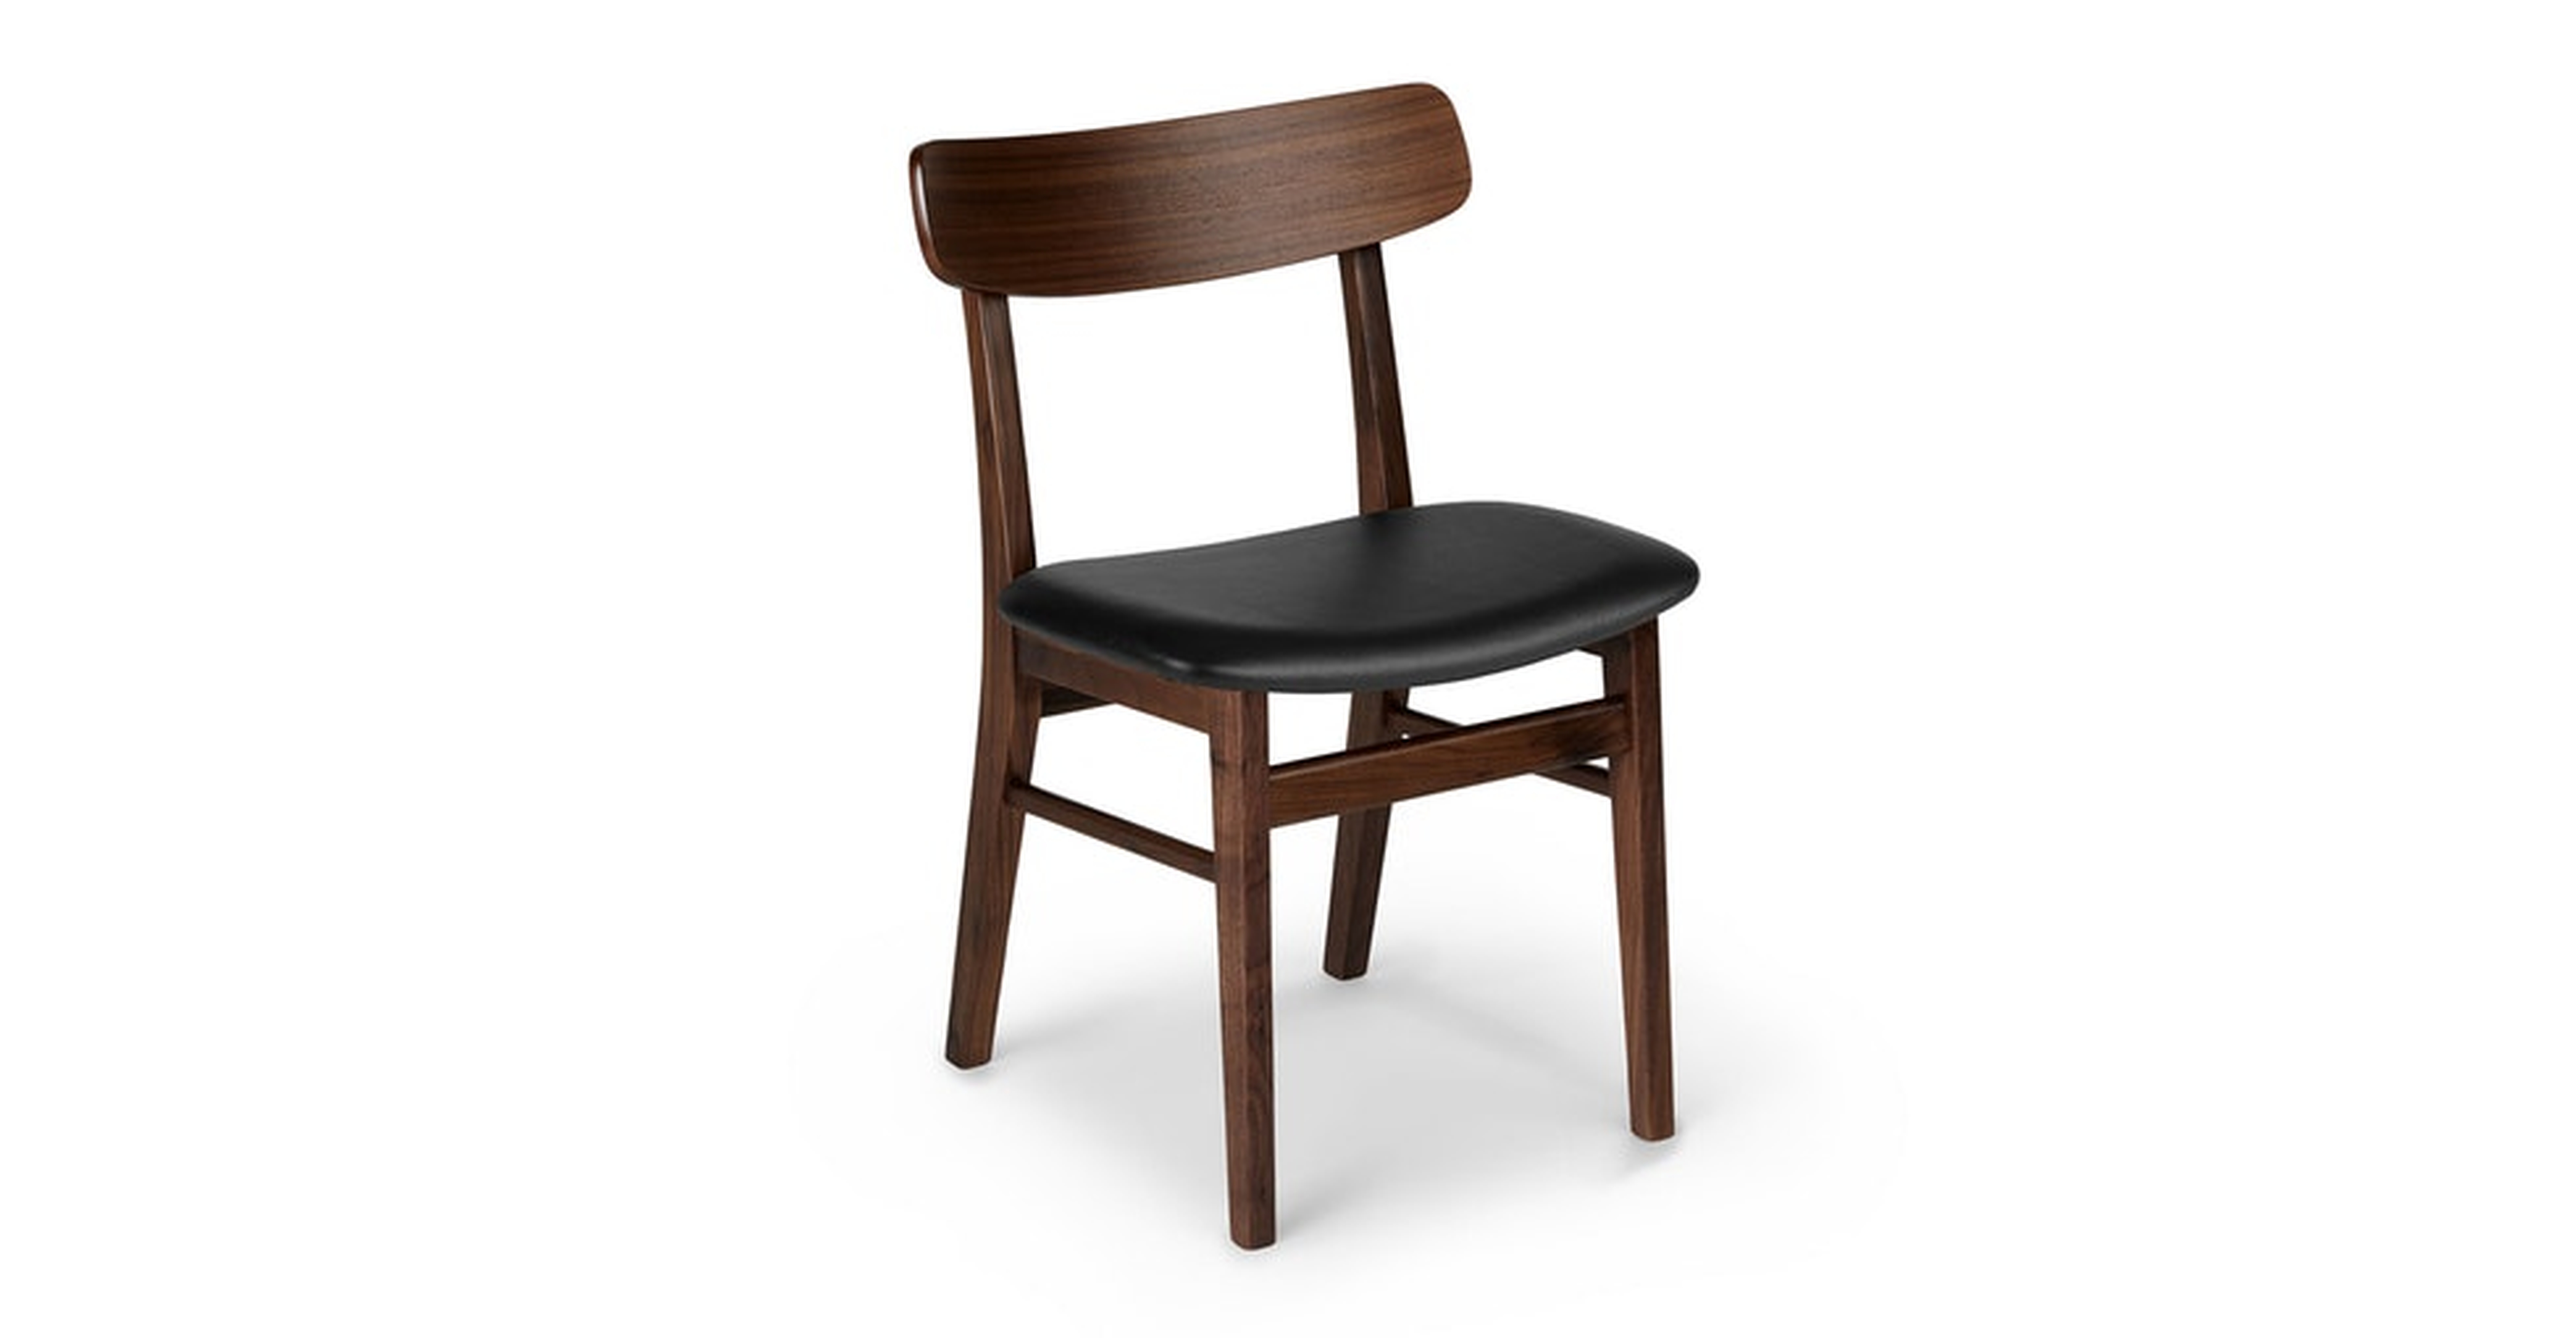 Ecole Black Leather Walnut Dining Chair - Article